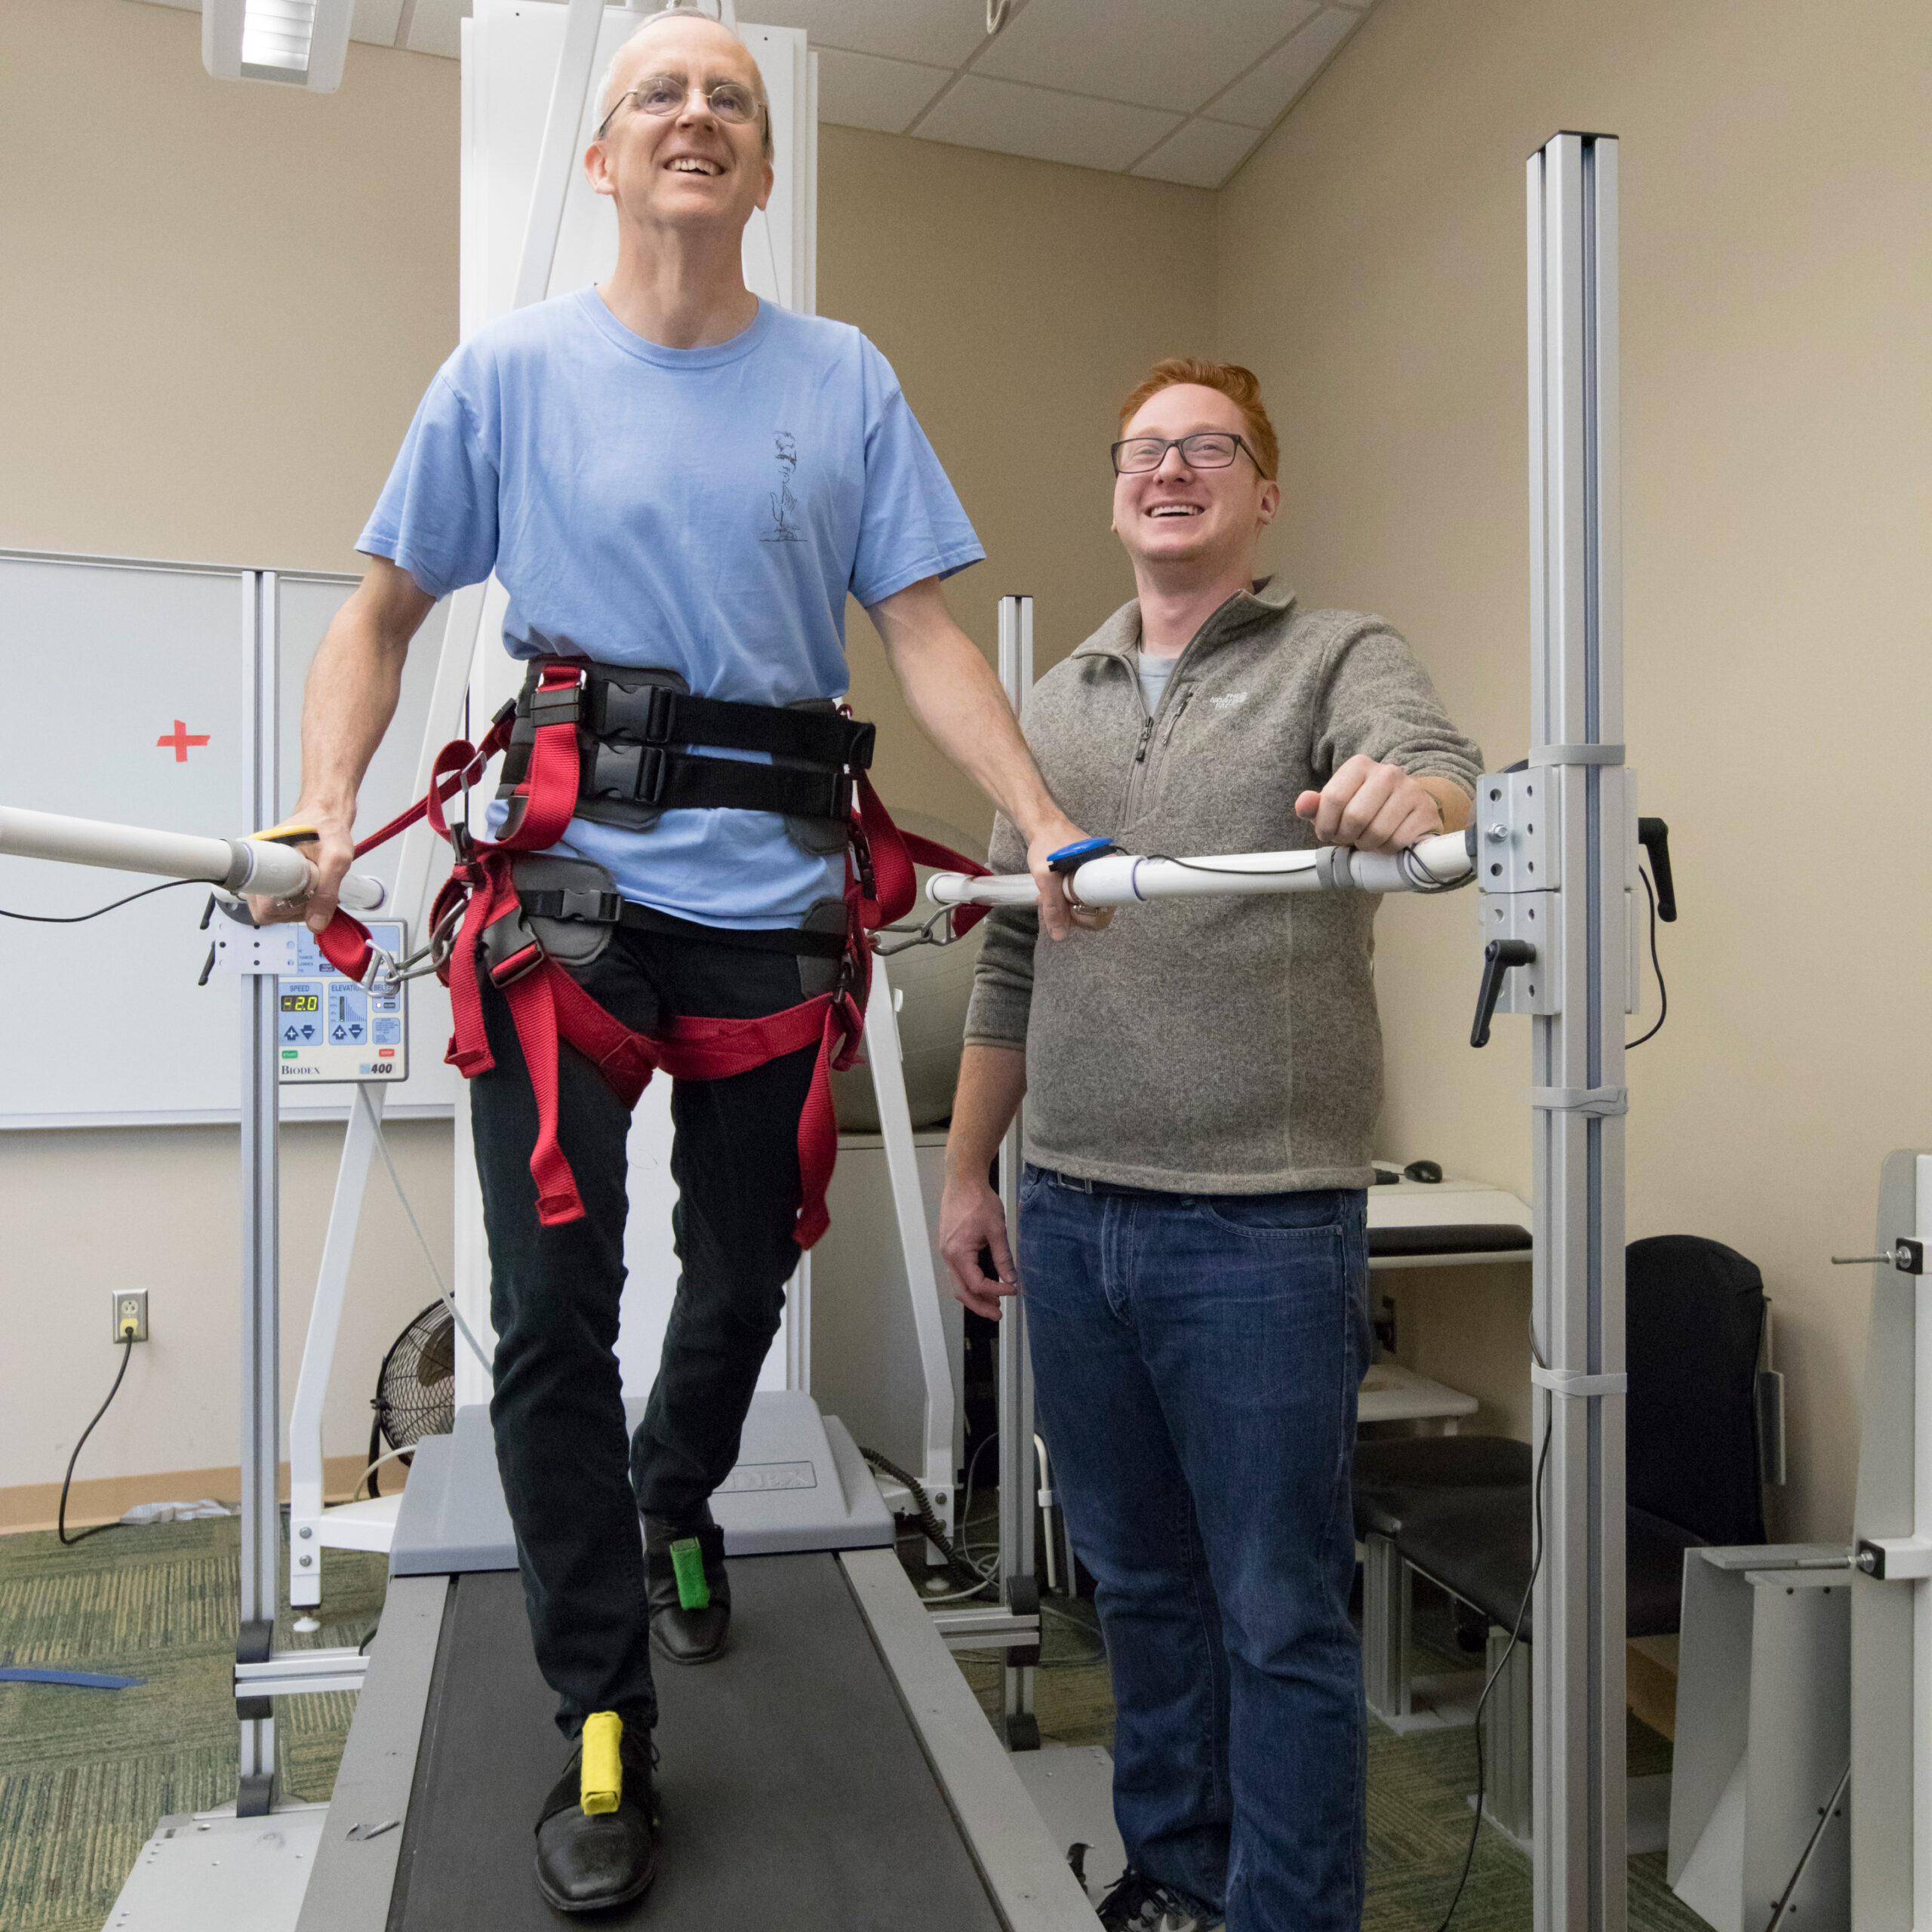 A man strapped onto an elliptical smiles as he walks while another person monitors him.